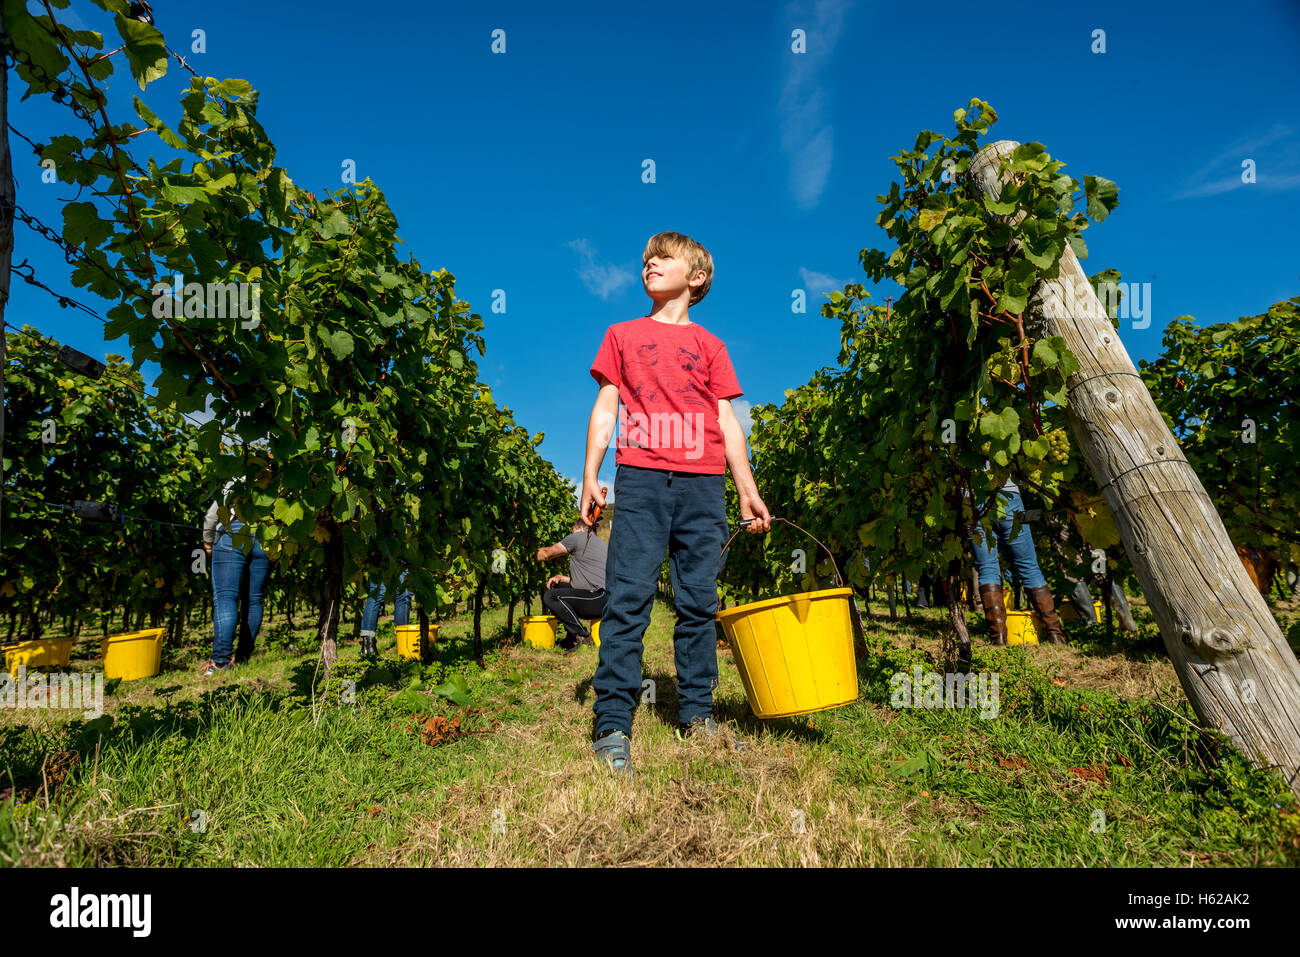 Nine-year-old Peter Duckworth, a volunteer grape-picker at the Breaky Bottom vineyard, near Lewes in East Sussex. English sparkl Stock Photo